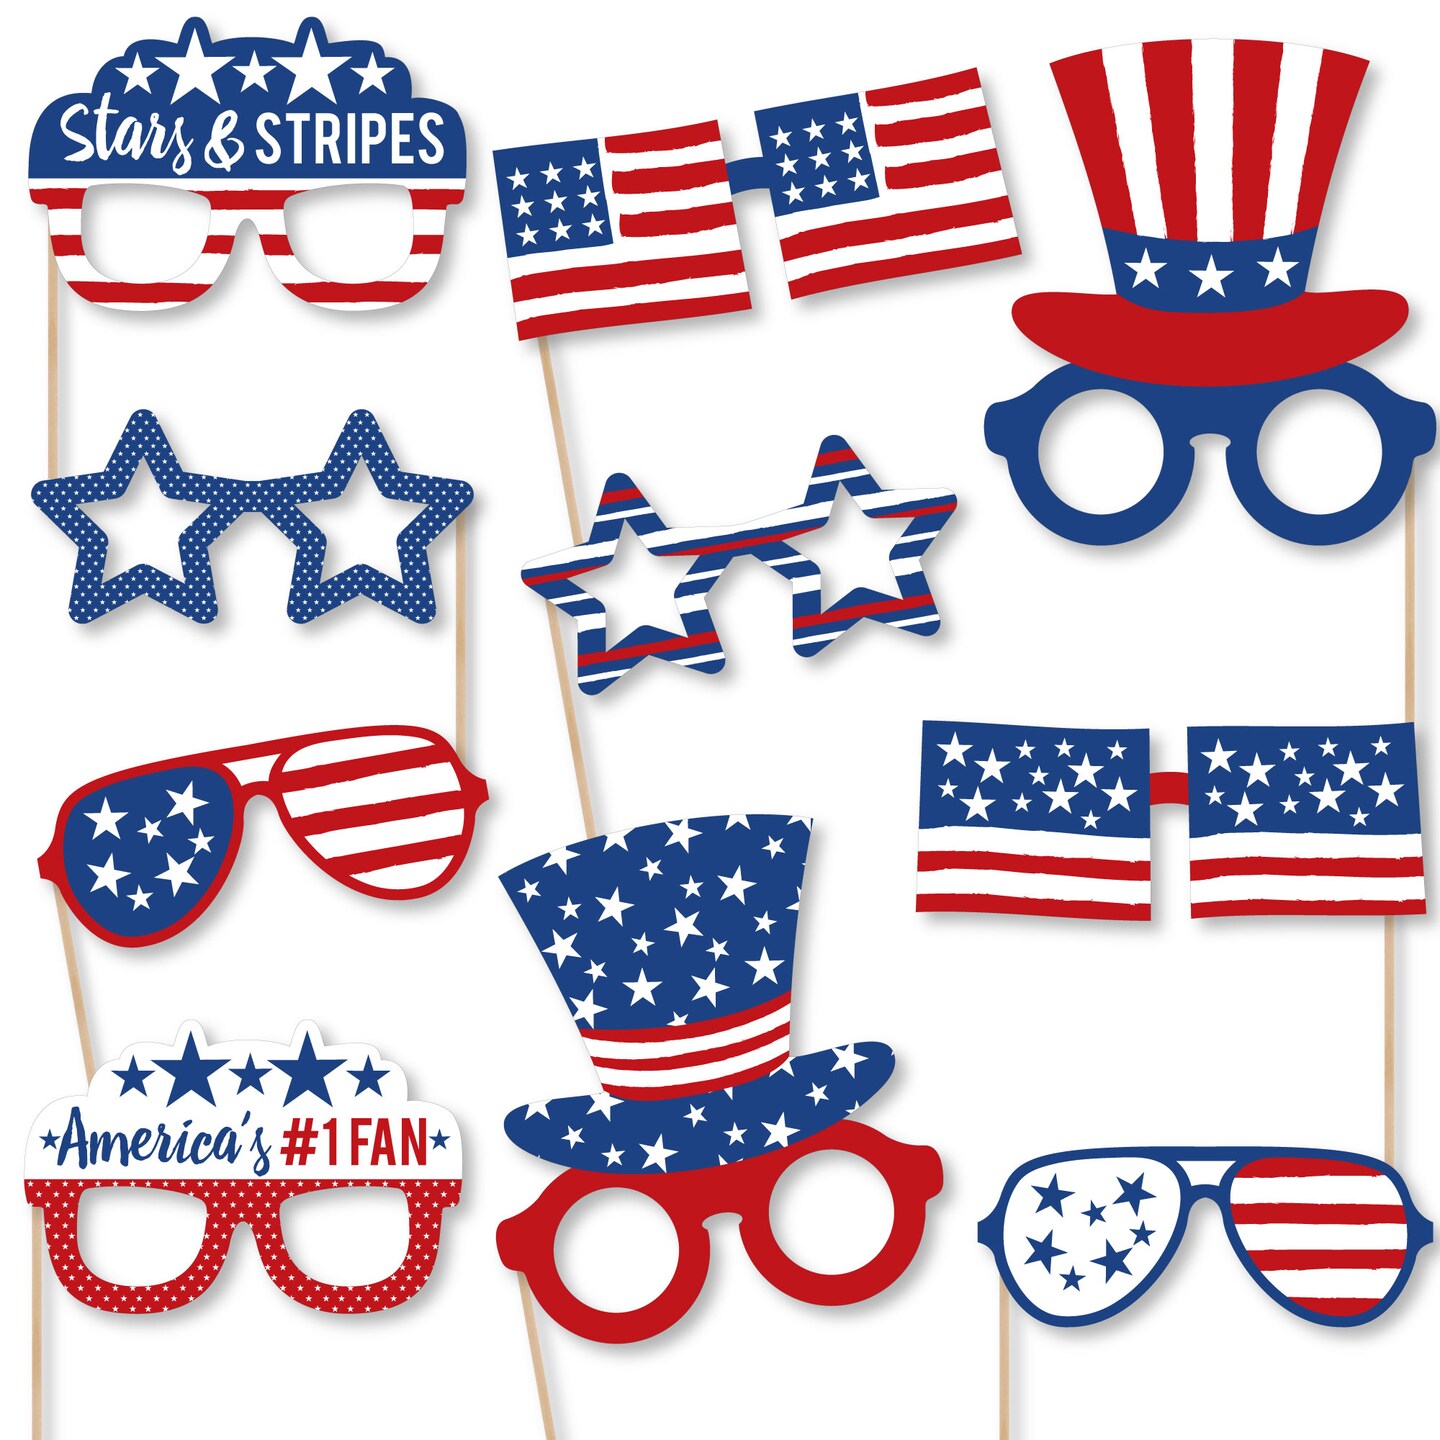 Big Dot of Happiness Stars &#x26; Stripes Glasses - Paper Card Stock Patriotic Party Photo Booth Props Kit - 10 Count